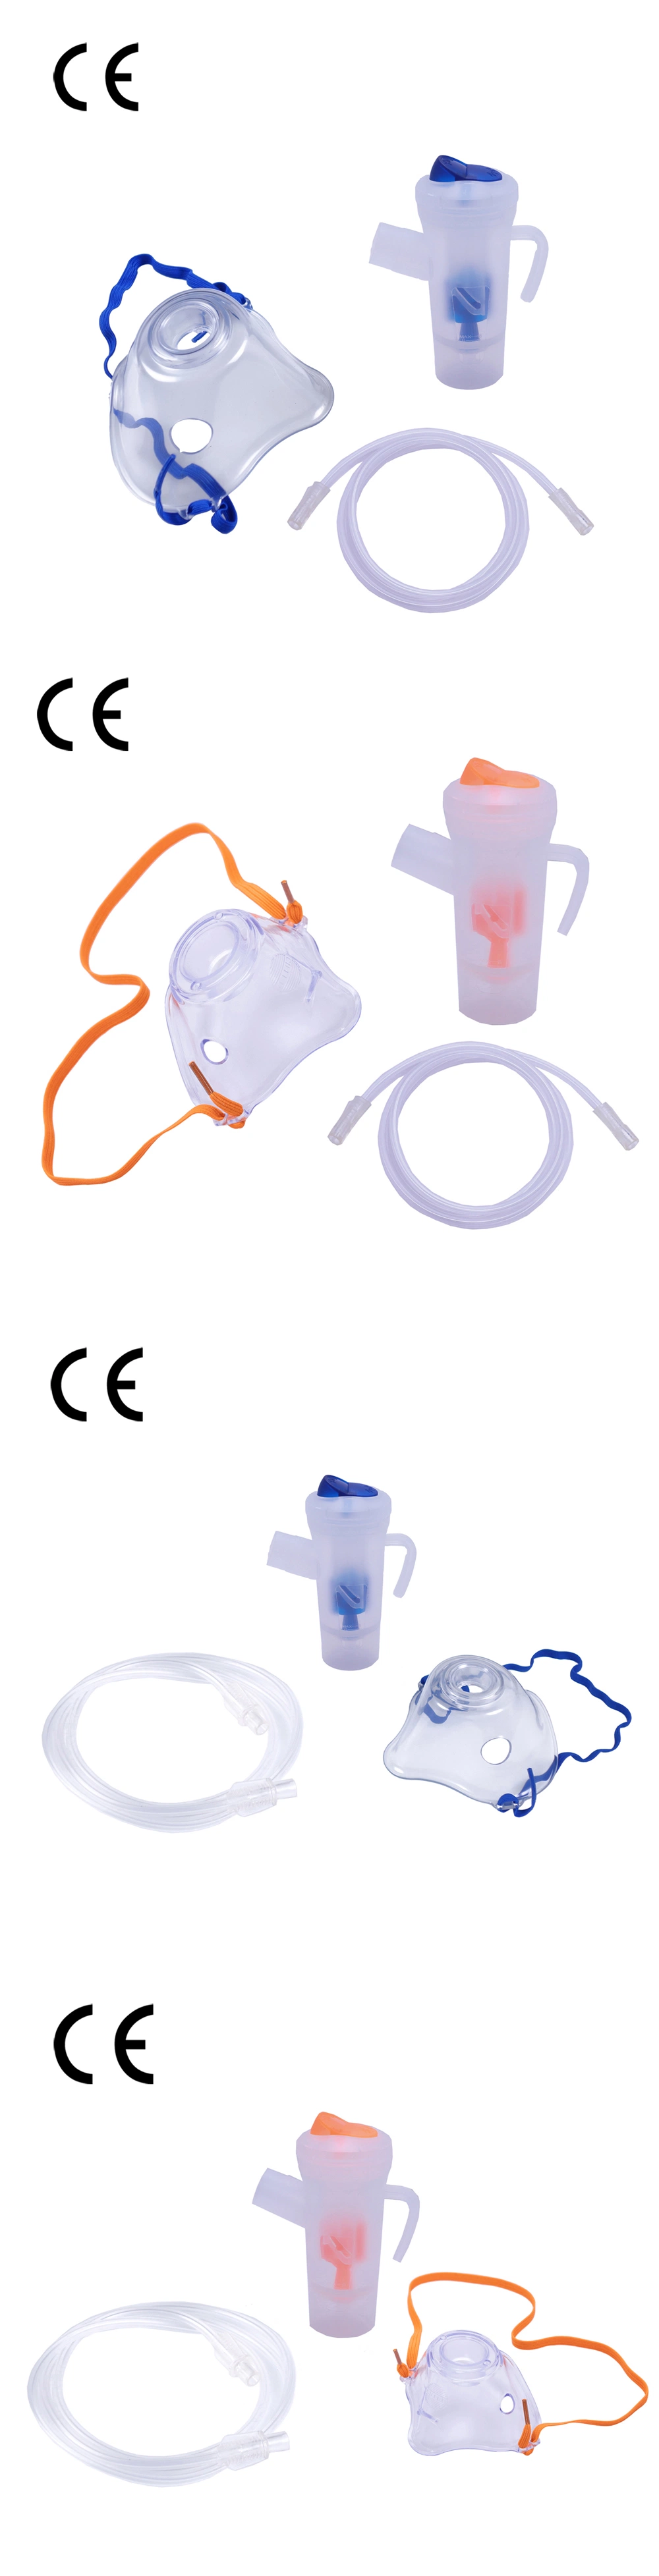 High Concentration Oxygen Therapy Adjustable Nebulizer Mask Atomization Cup Button Slide Twin Adjustment Hospital Use Nebulizer Cup Kit with Oxygen Tube